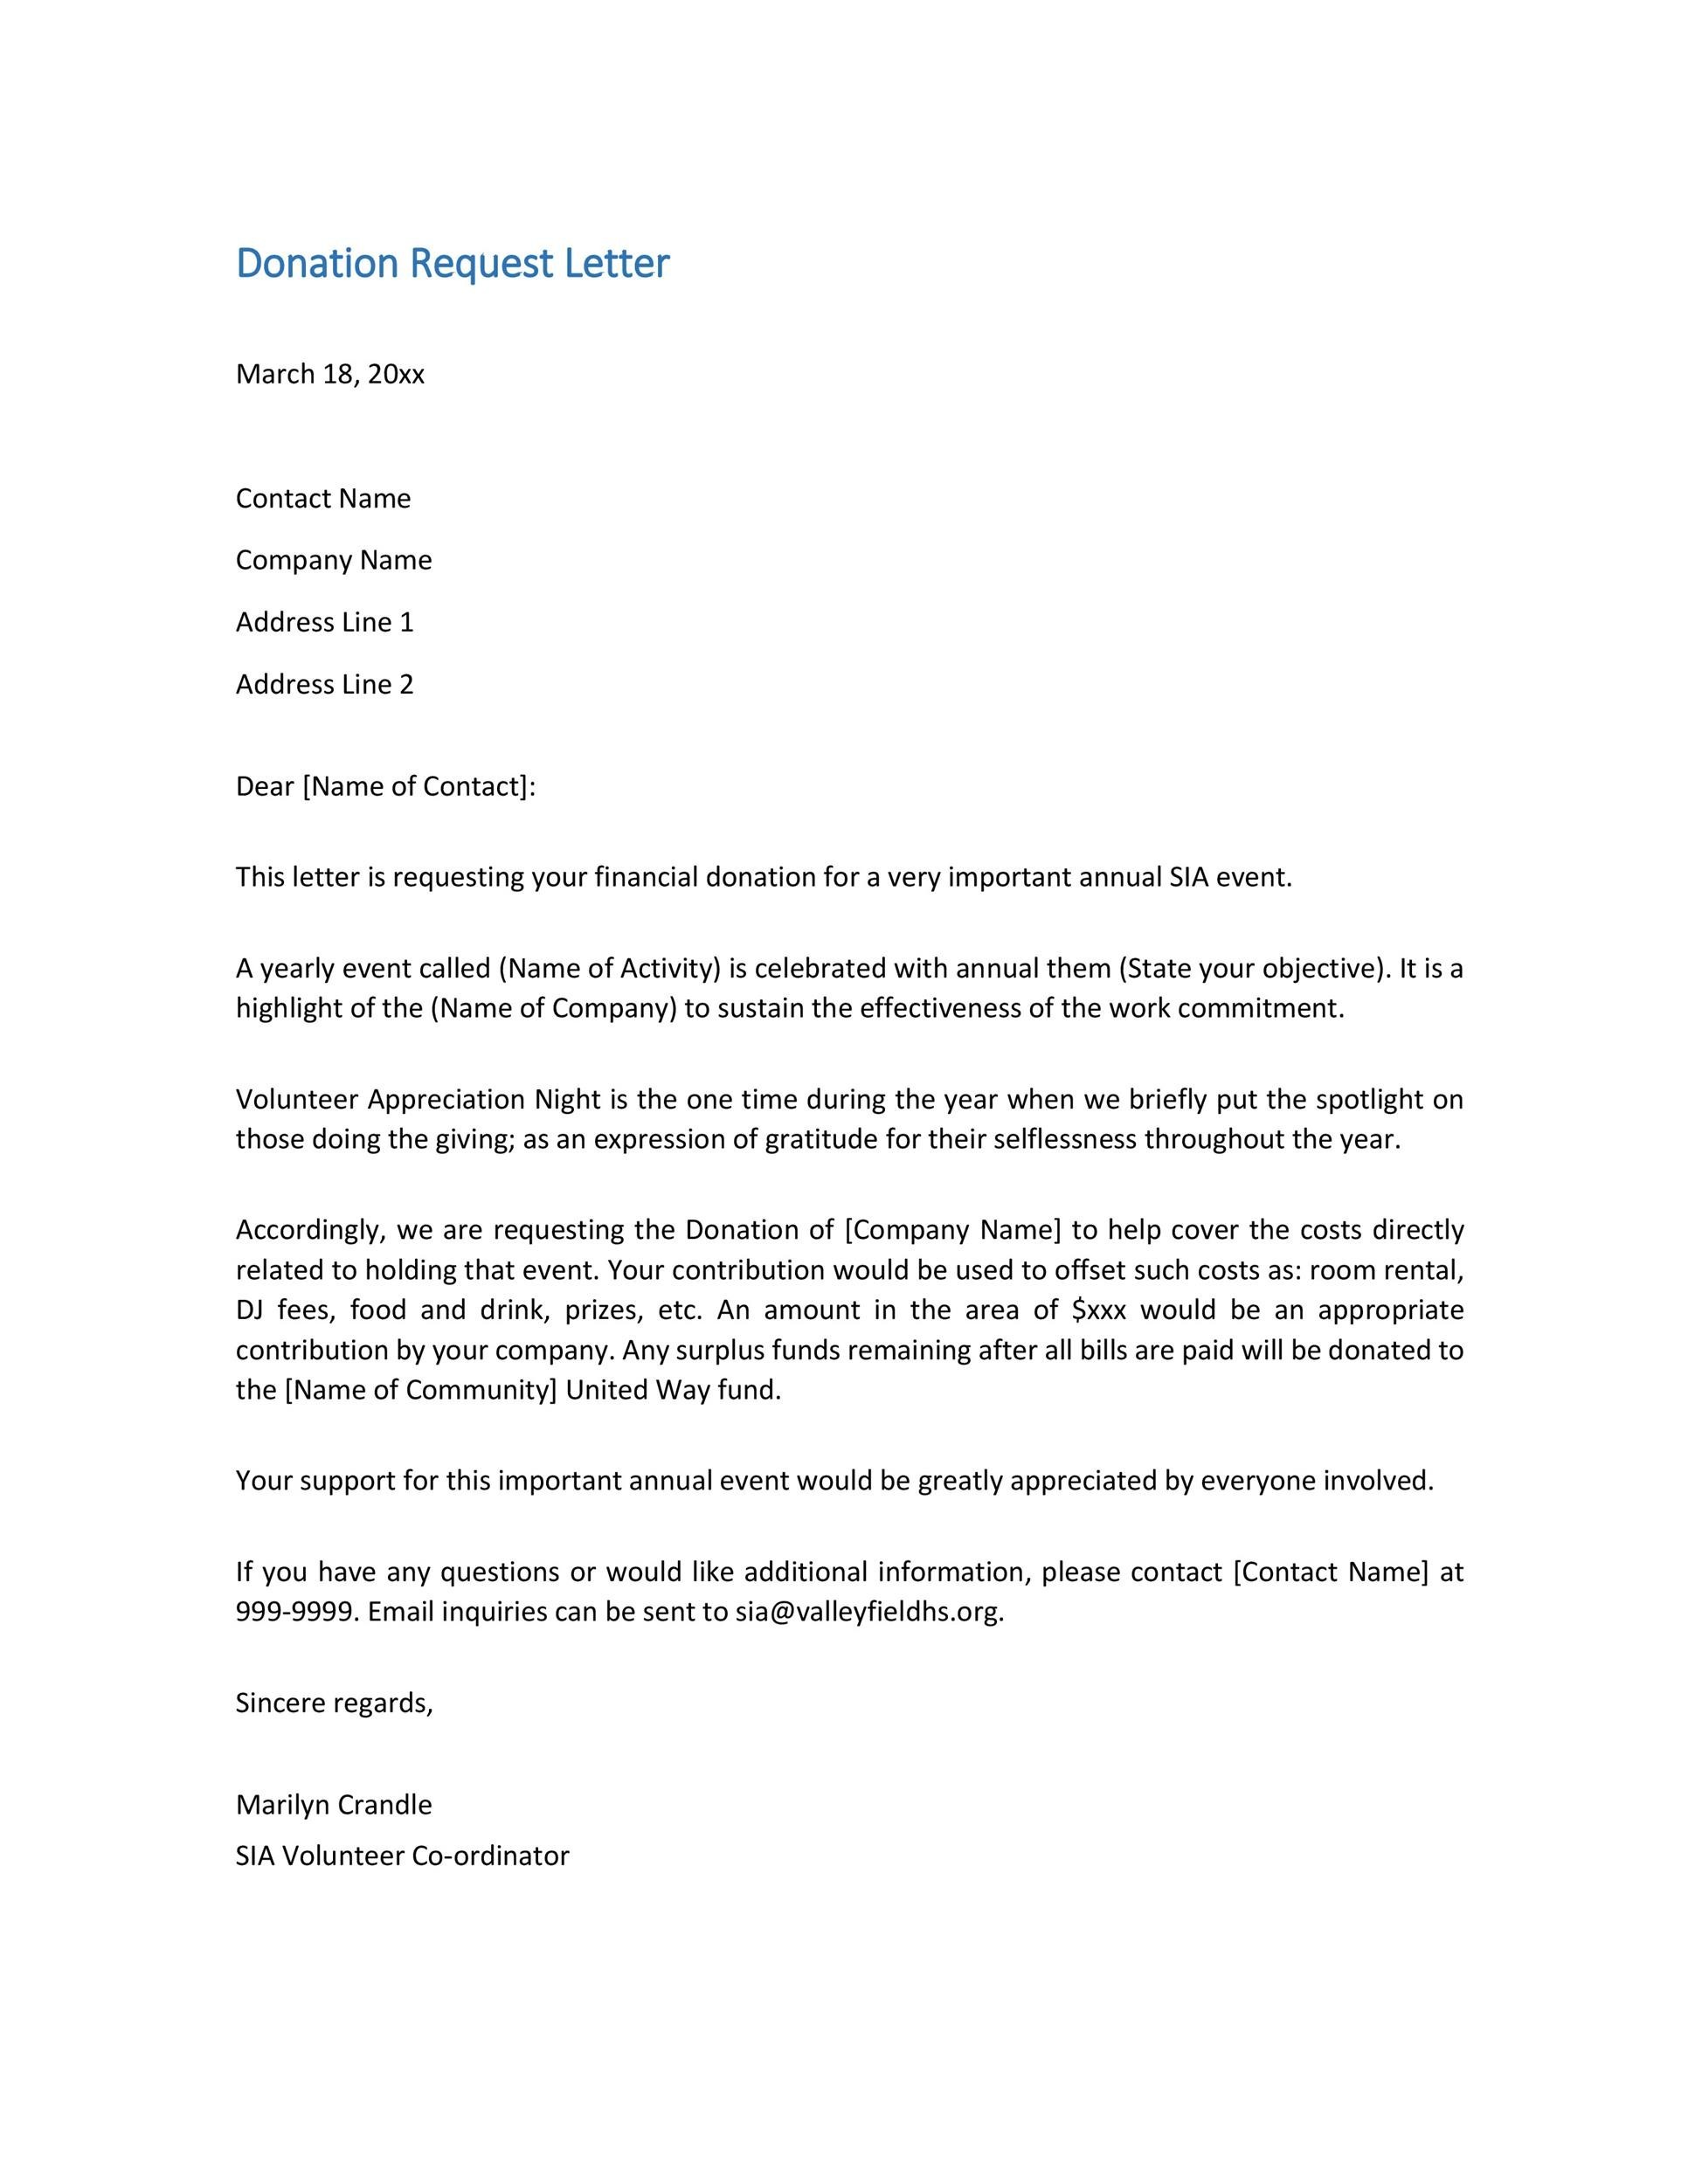 How To Write A Donation Request Letter Template